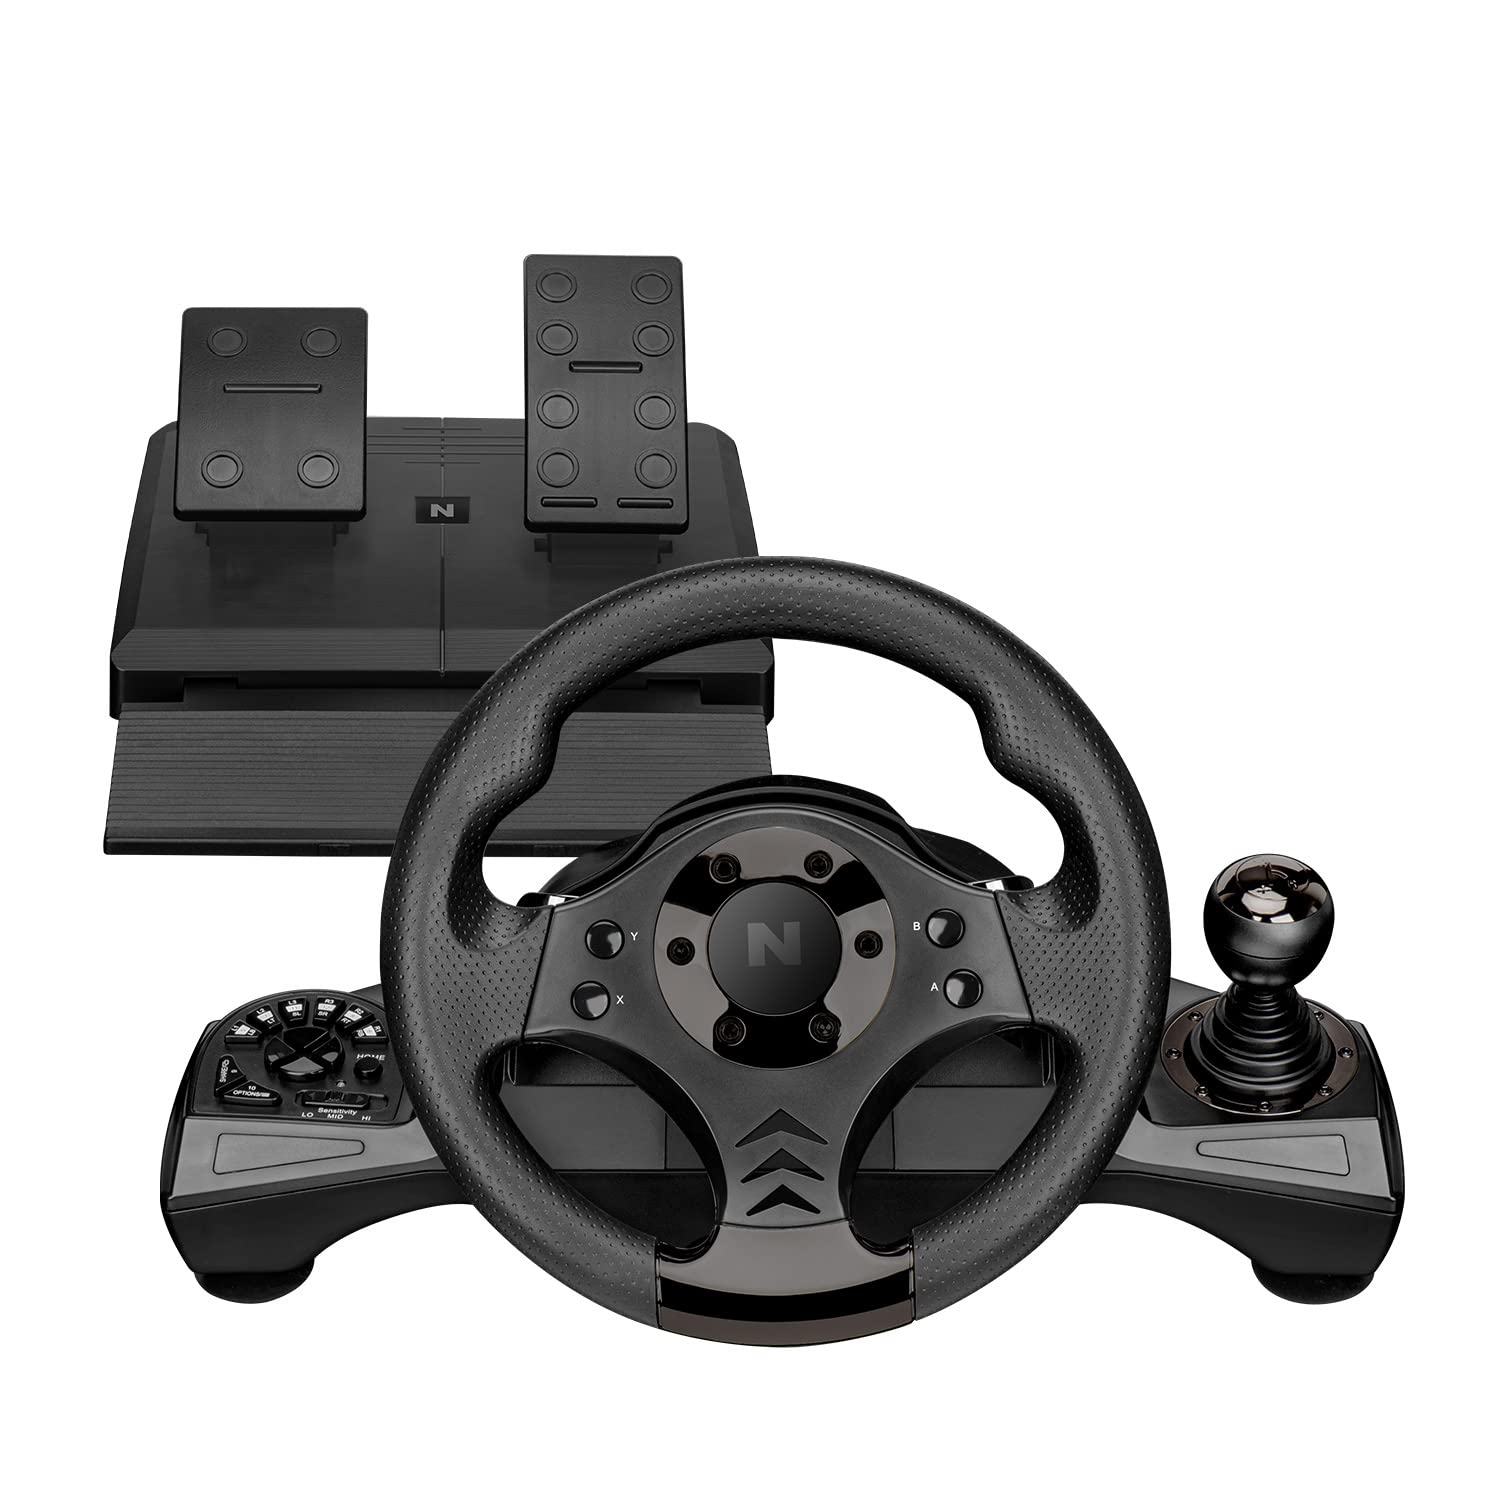 Nitho Drive PRO V16 Gaming Racing Wheel with Shifter and Floor Pedals - Multi-Format Compatibility - Realistic Driving Feedback - High-Quality Construction - Easy-Access Game Controls